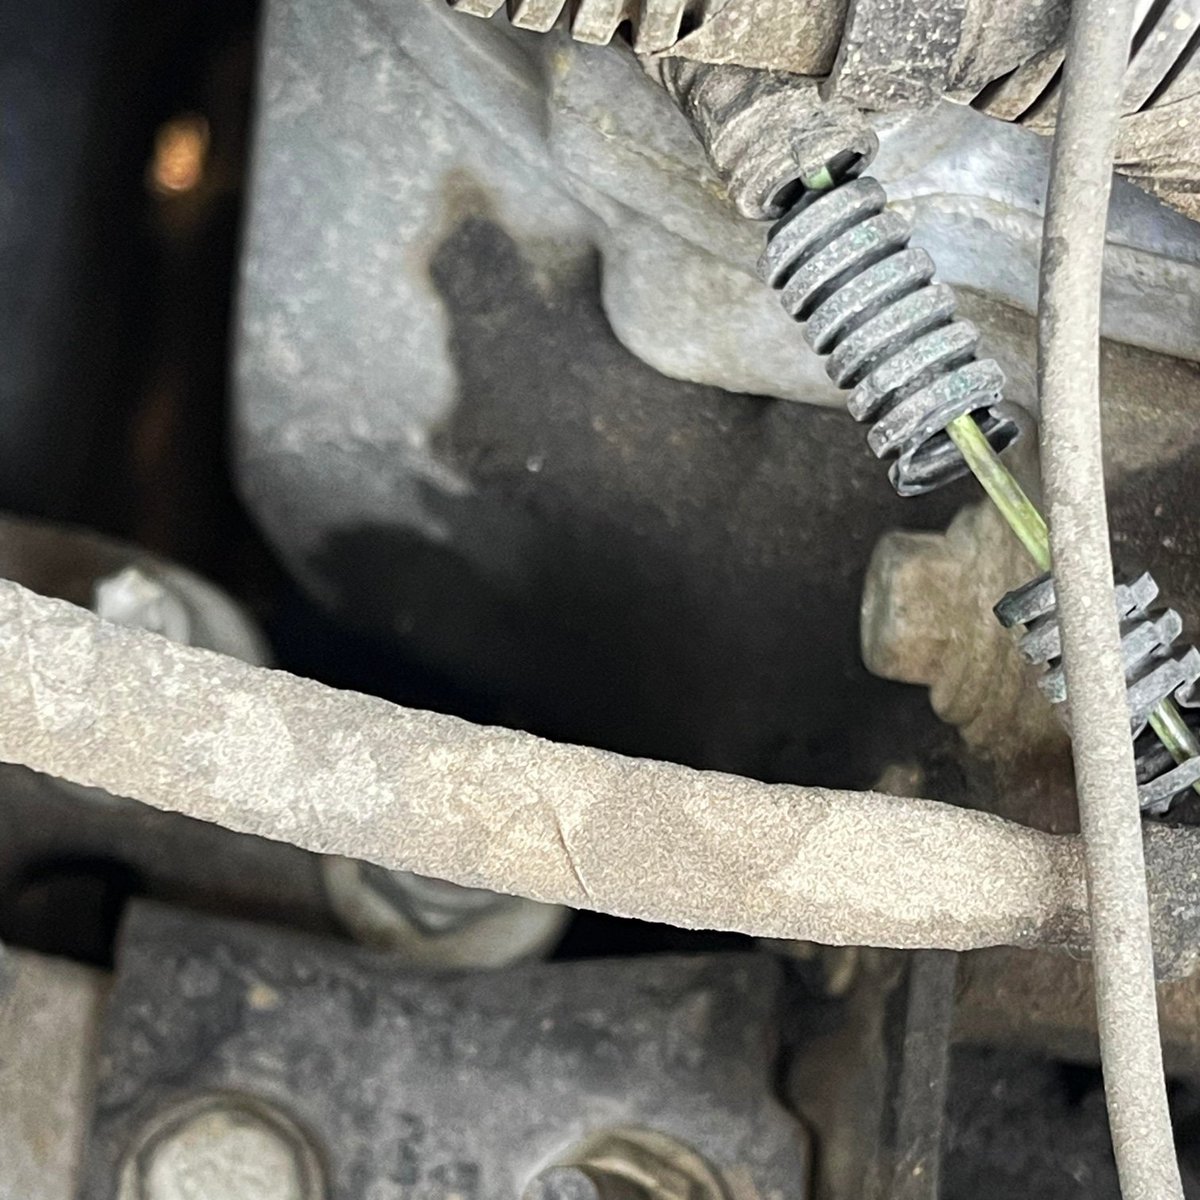 Locating leaks and damage to parts early on will help to ensure the performance and overall safety of your vehicle while identifying potential repairs before they become major headaches. 👨🏾‍🔧🇺🇸💪🏾

andersonmobileoil.com 
#careducation
#inspection
#Vehiclemaintenance
#andersonsoil